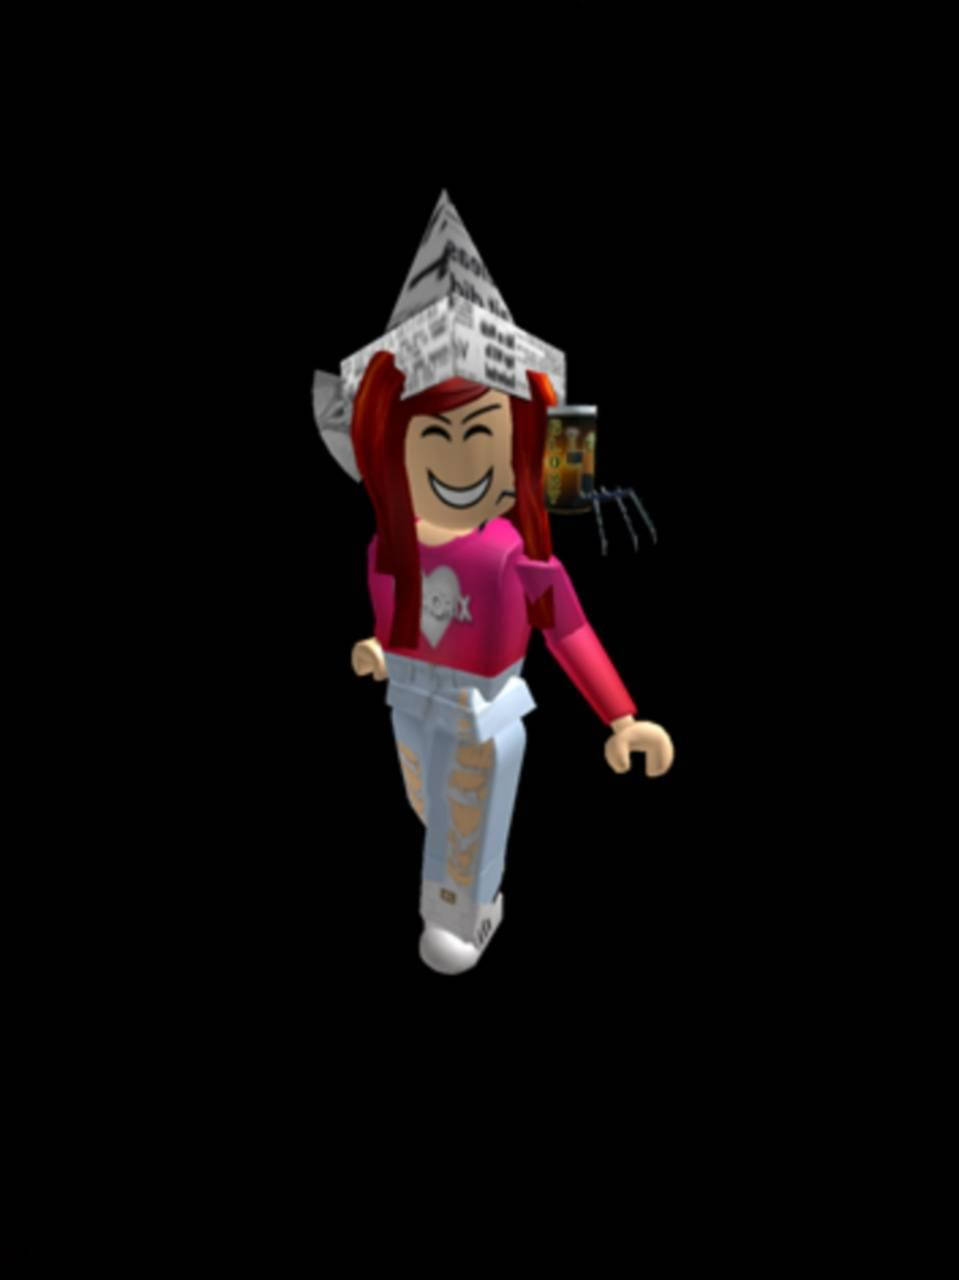 Cutest Roblox Outfit Ever! Background